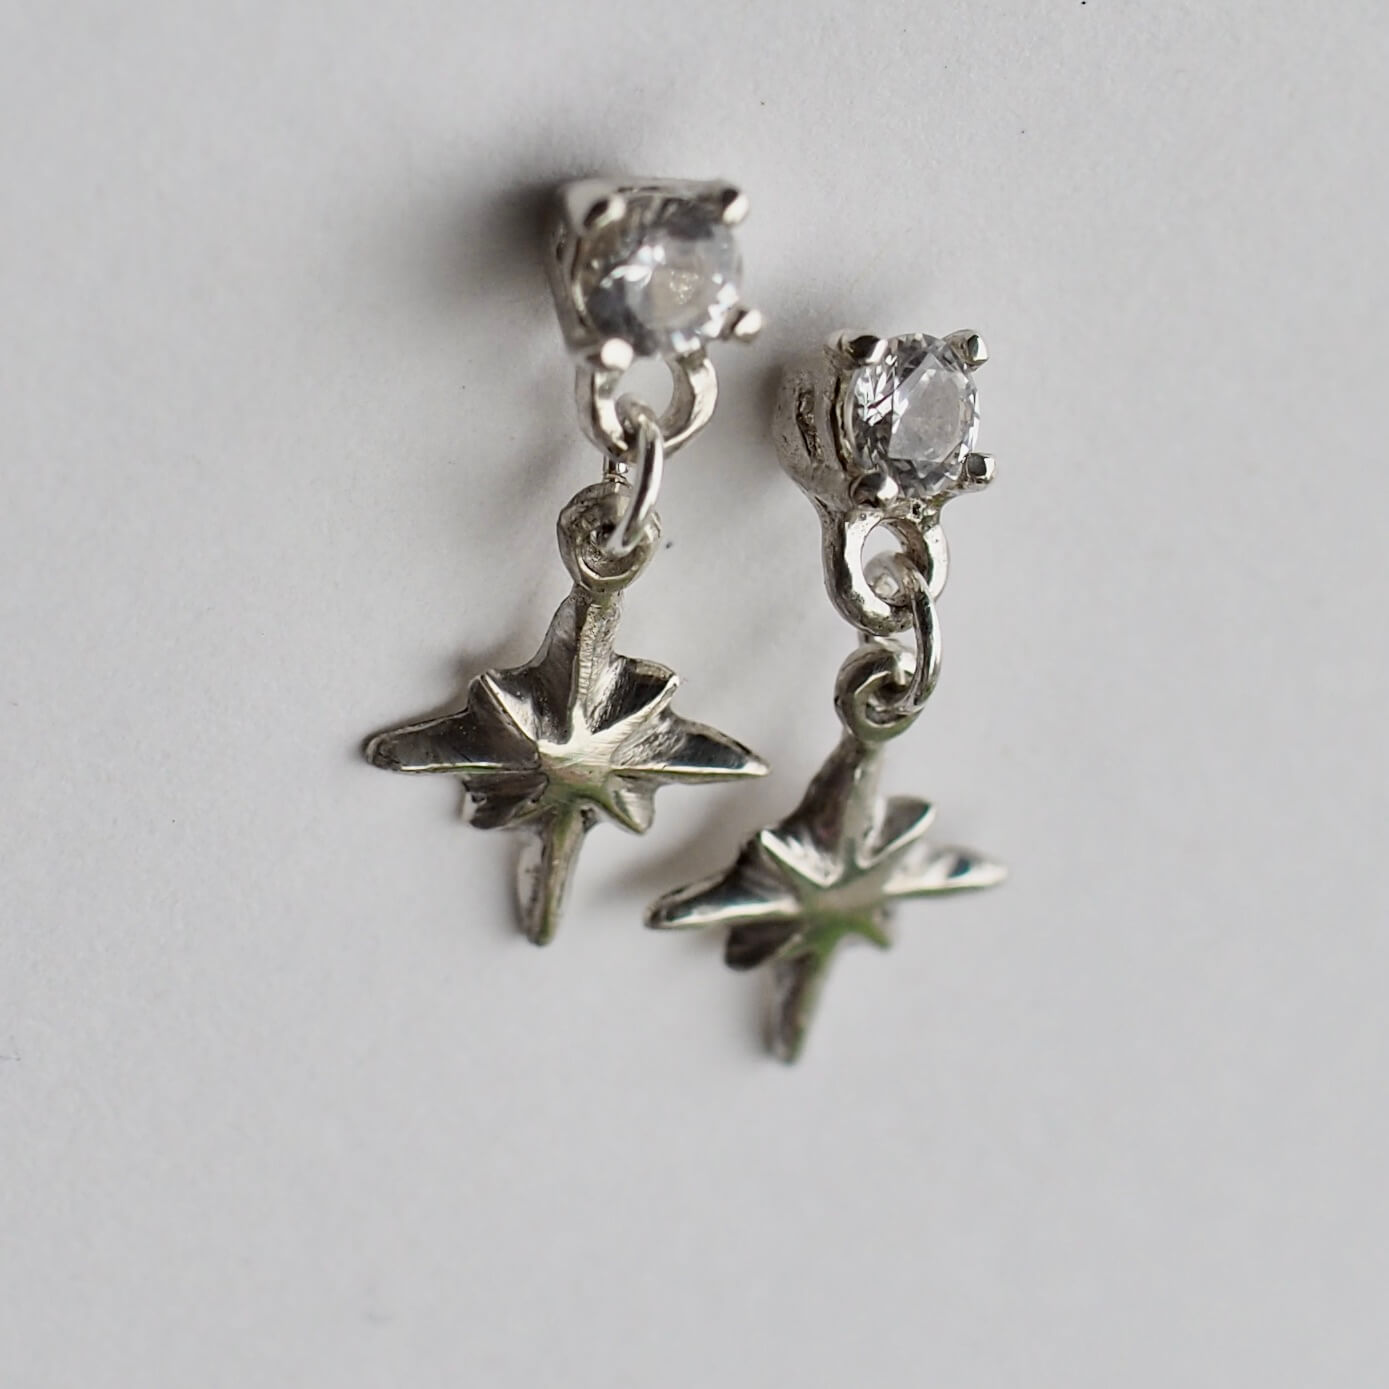 Tiny dangly star earrings set with 4mm clear cubic zirconia, in sterling silver. Made by Iron Oxide Designs